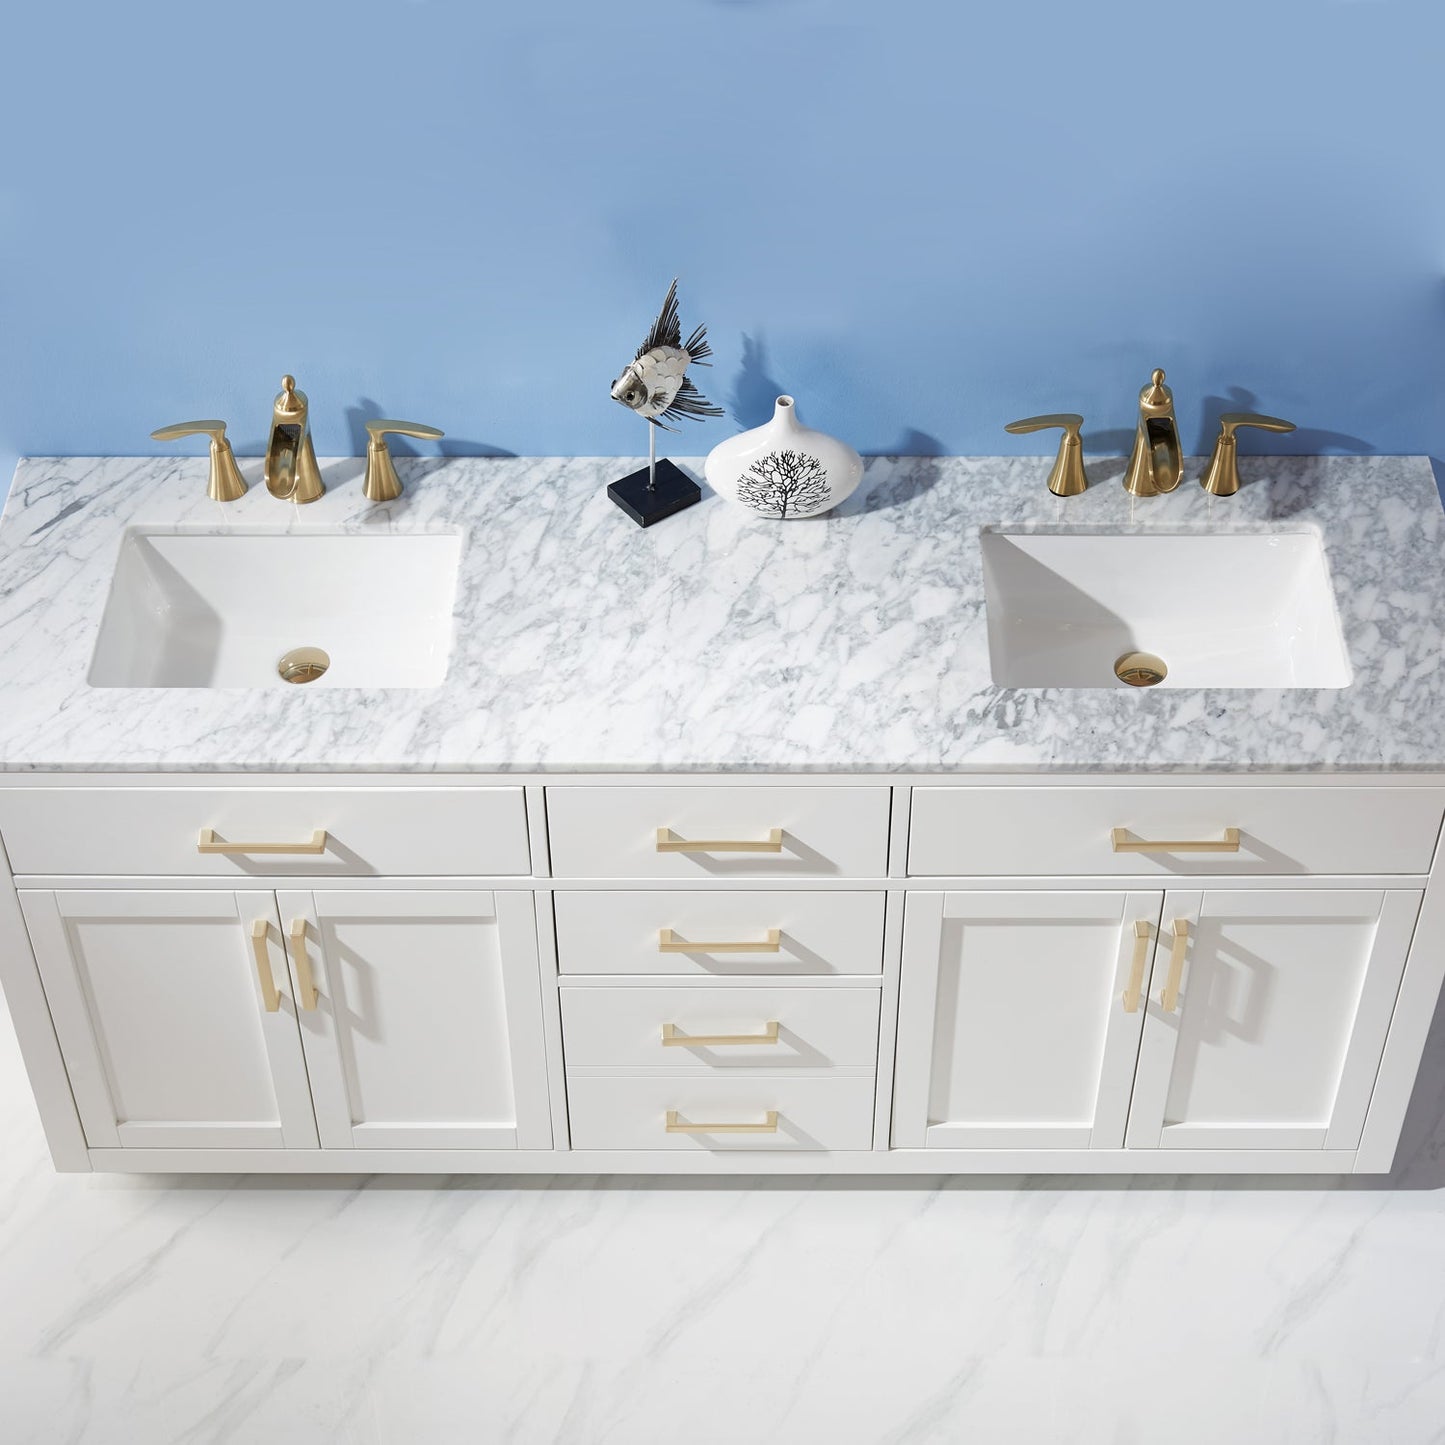 Ivy 72" Double Bathroom Vanity Set in White and Carrara White Marble Countertop without Mirror